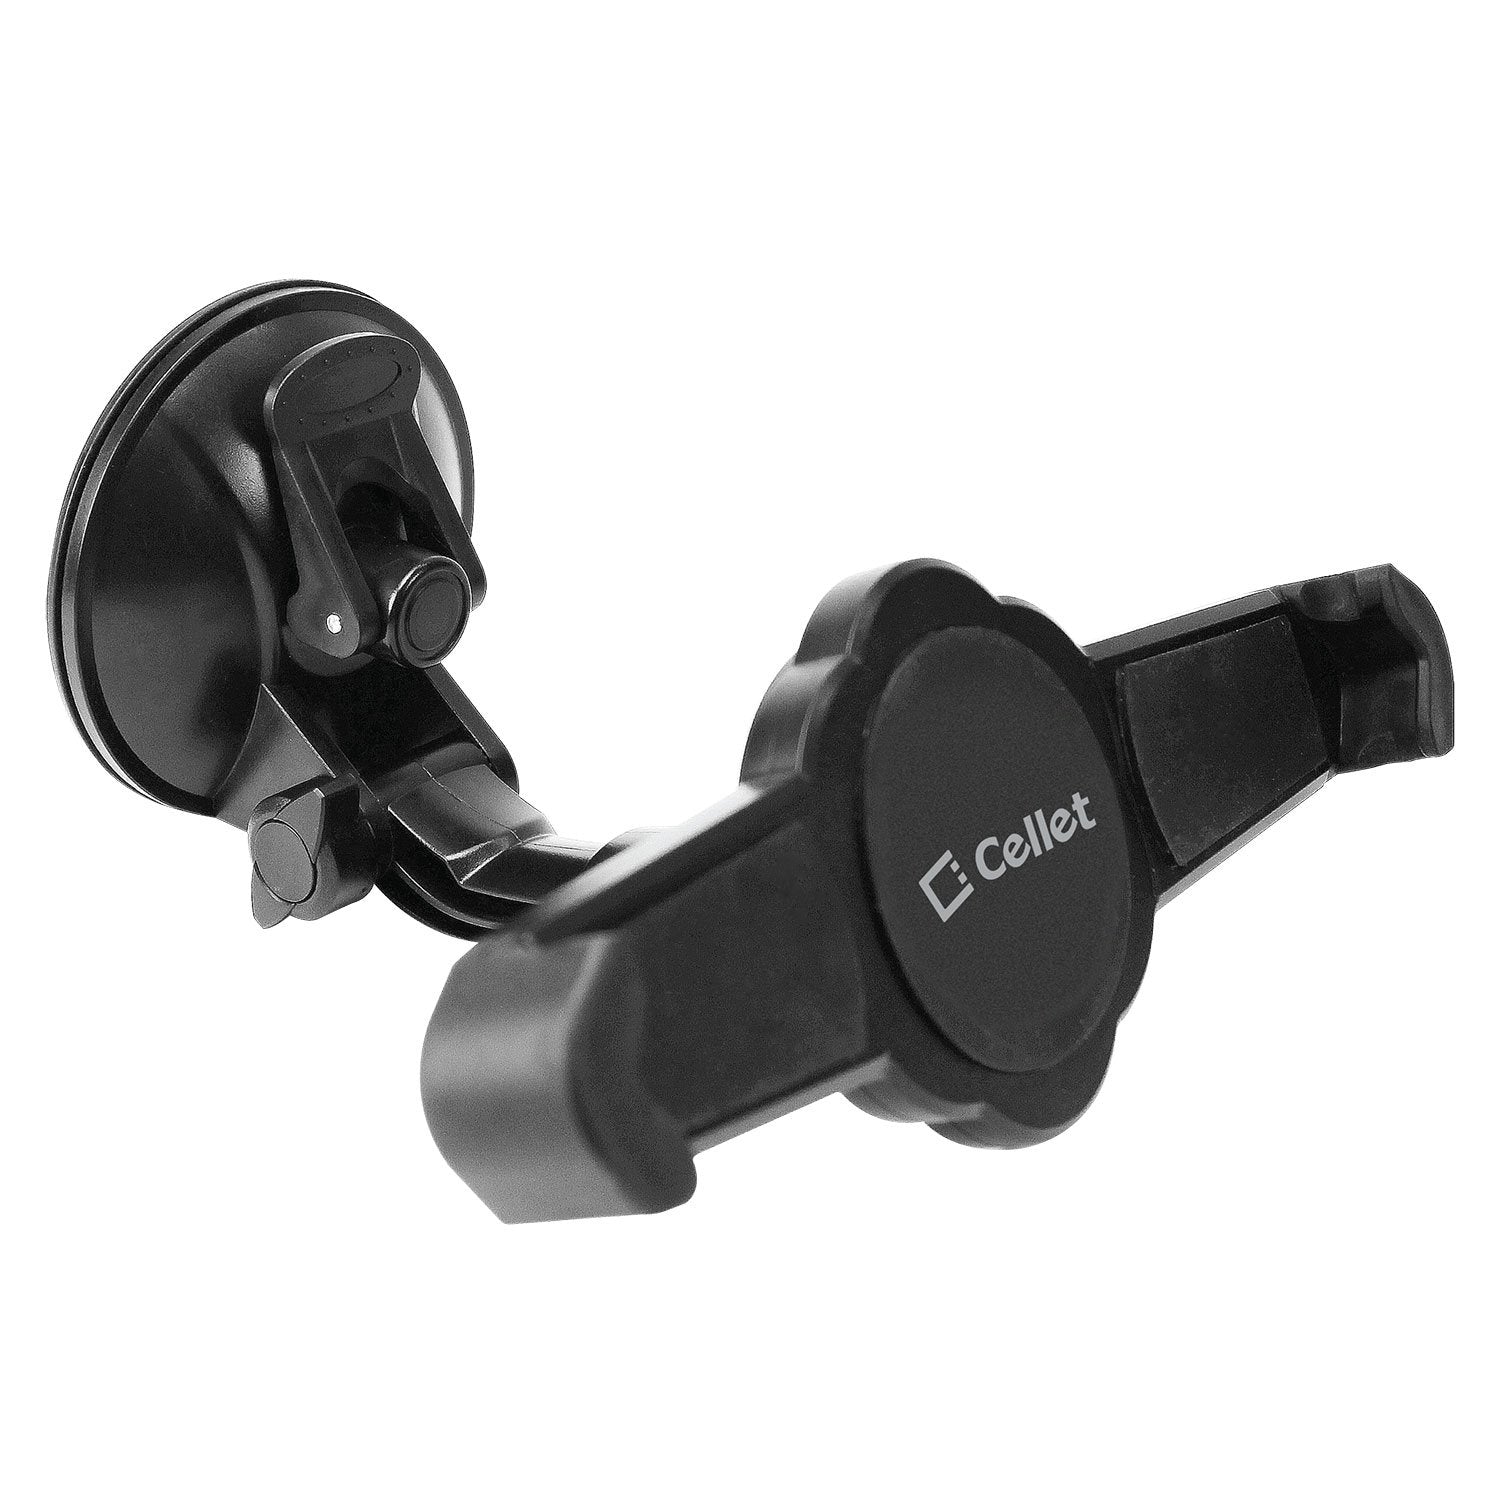 PHTABCN -Windshield Tablet Car Mount Holder with Large Suction Cup, Ho –  Cellet Retail